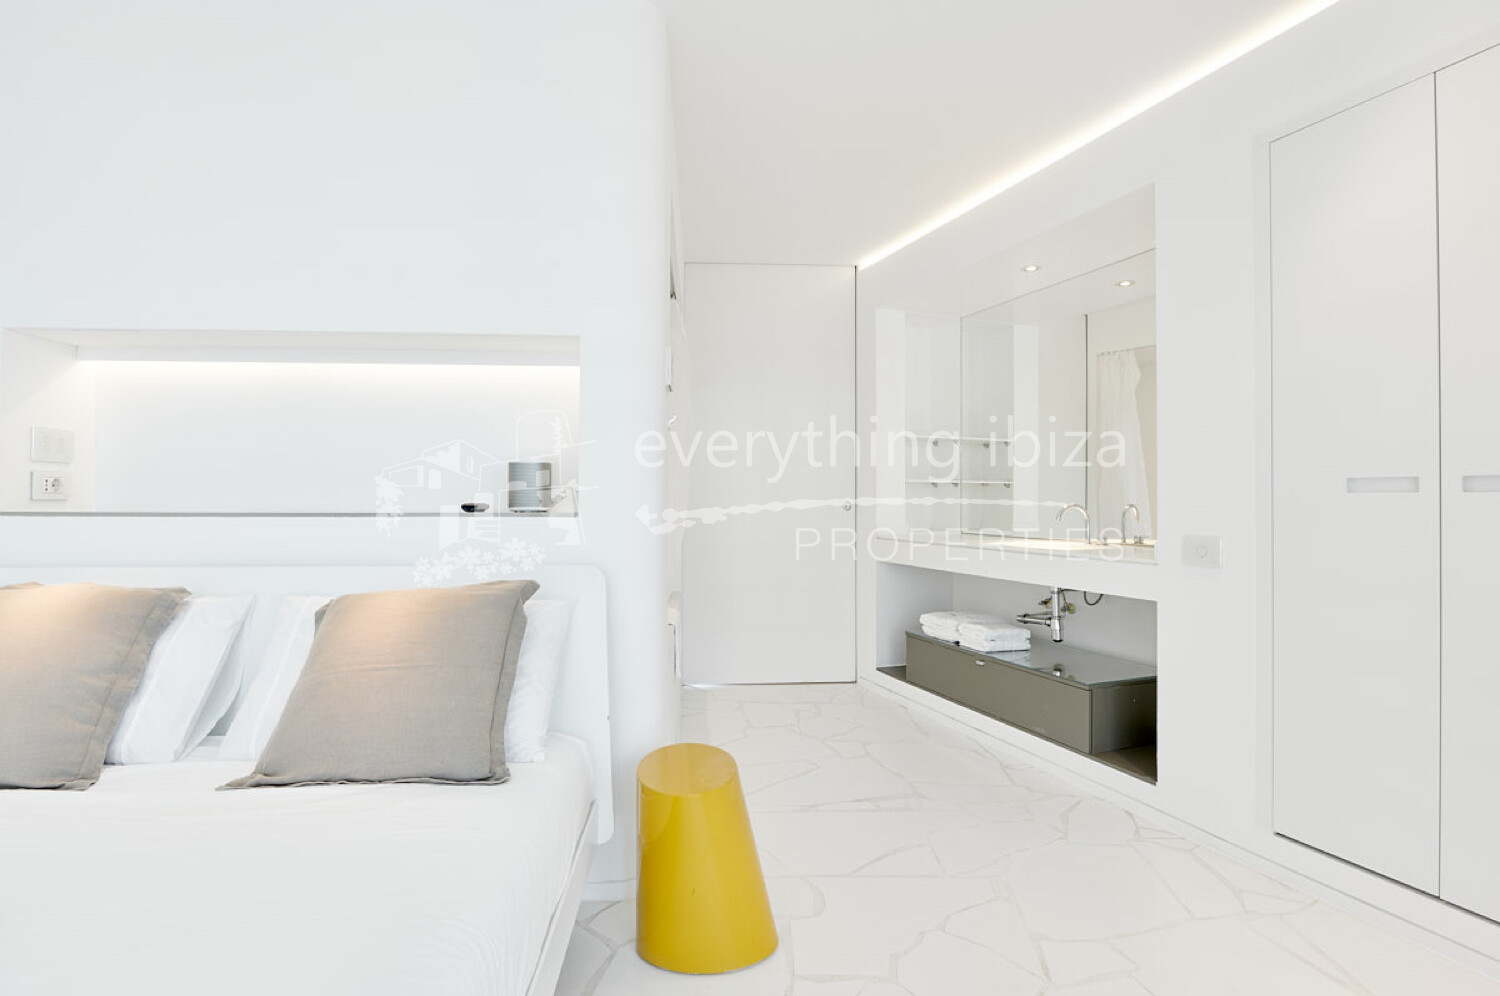 Contemporary Apartment near Talamanca Overlooking the Yachting Marina and Ibiza Old Town, ref. 1669, for sale in Ibiza by everything ibiza Properties